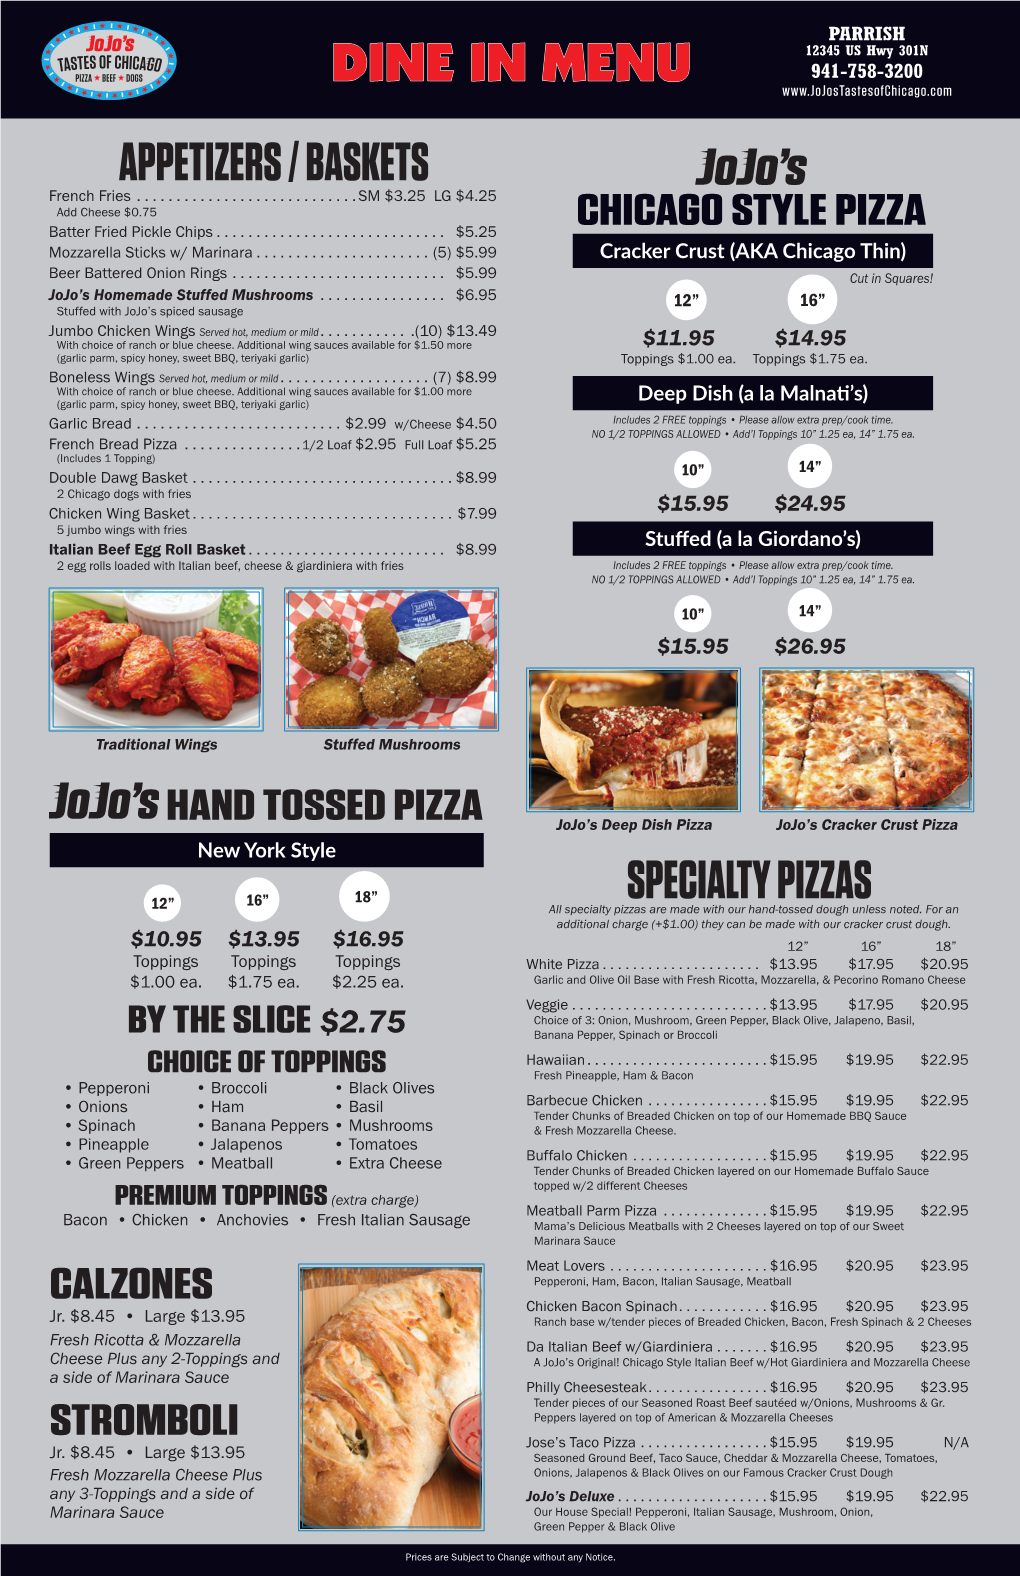 SPECIALTY PIZZAS 12” All Specialty Pizzas Are Made with Our Hand-Tossed Dough Unless Noted